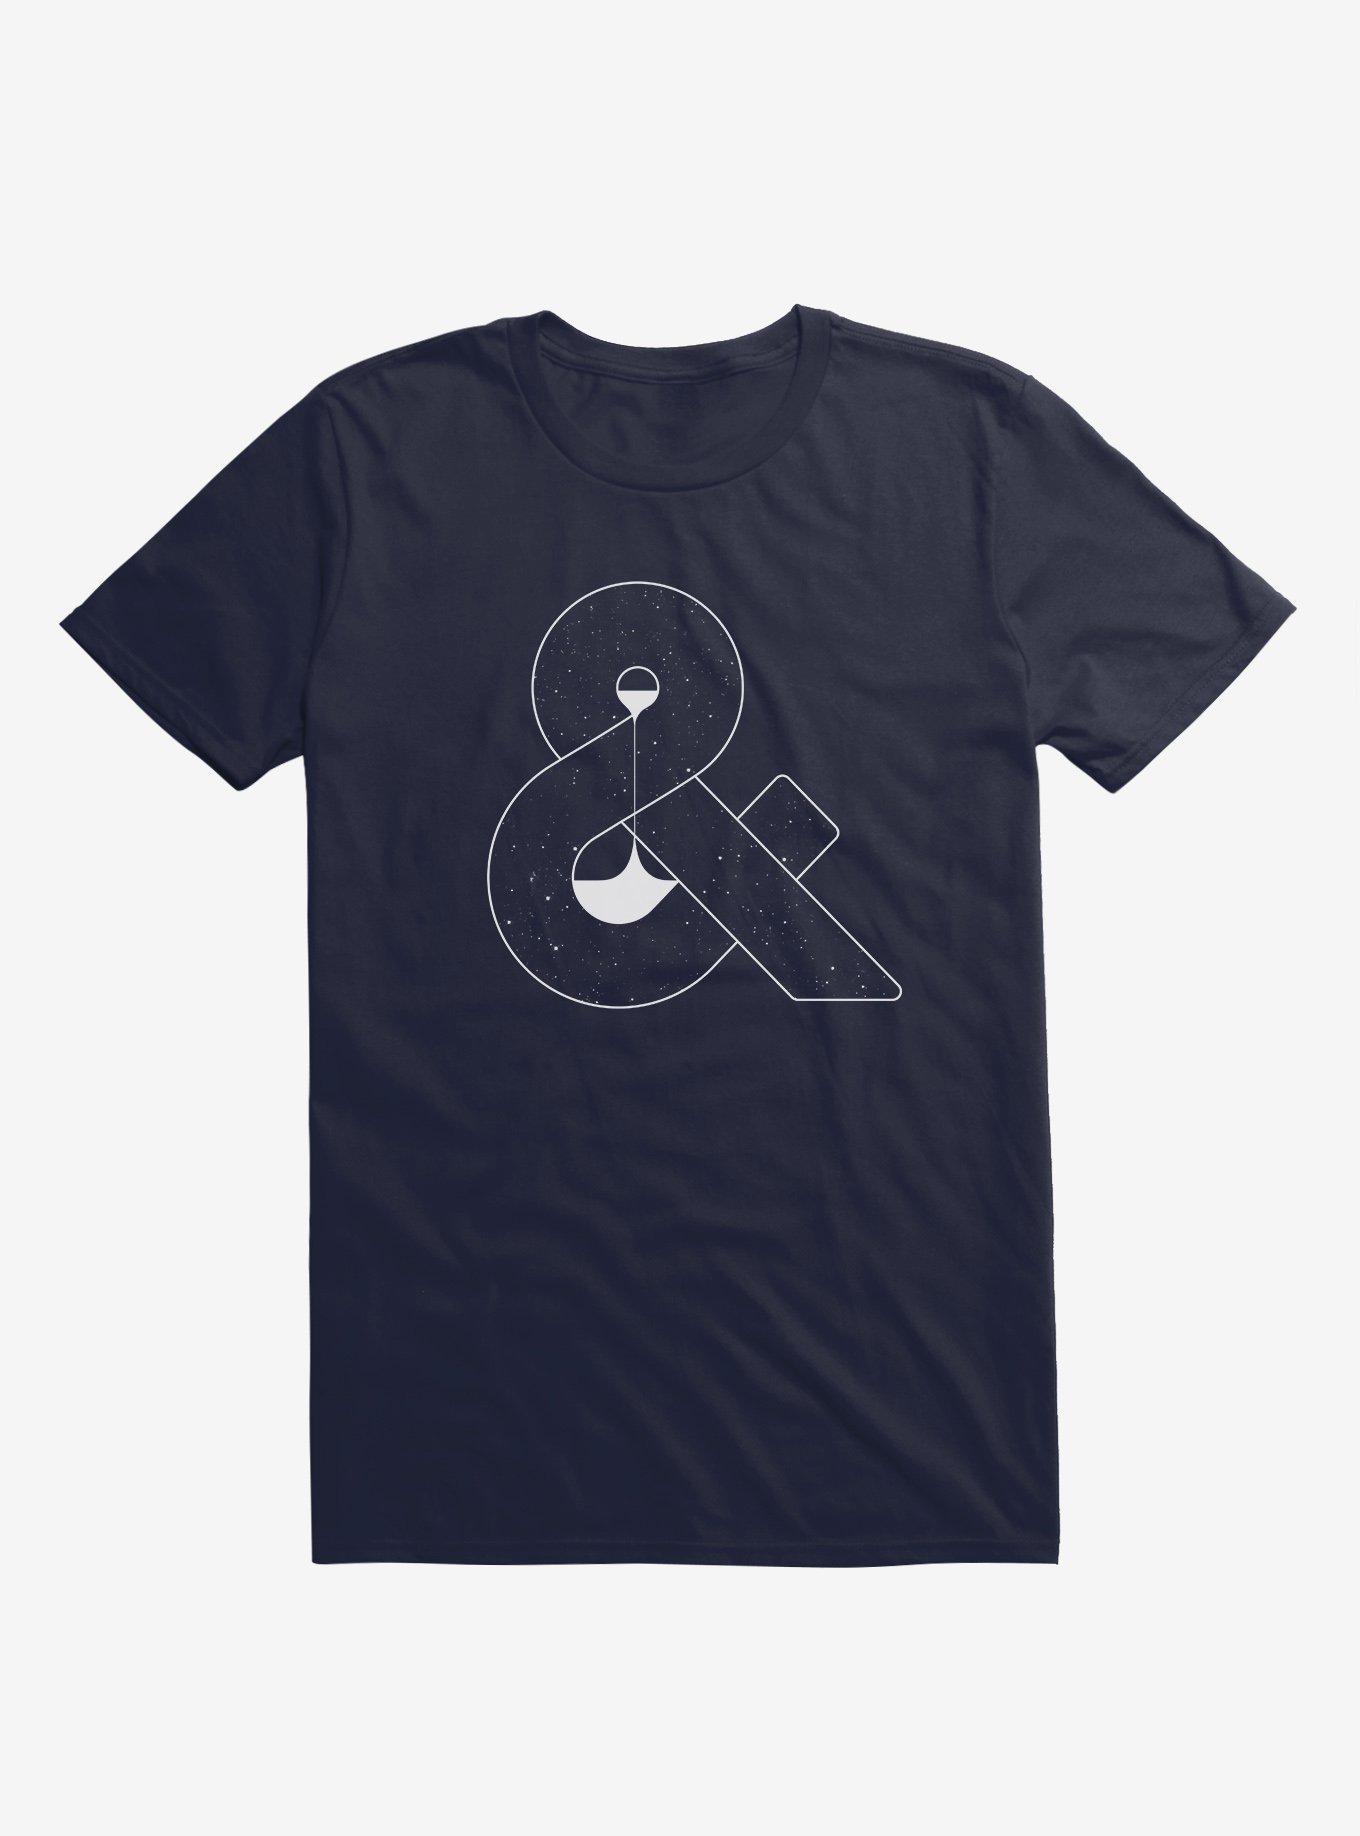 Time & Space Ampersand Navy Blue T-Shirt - BLUE | Hot Topic